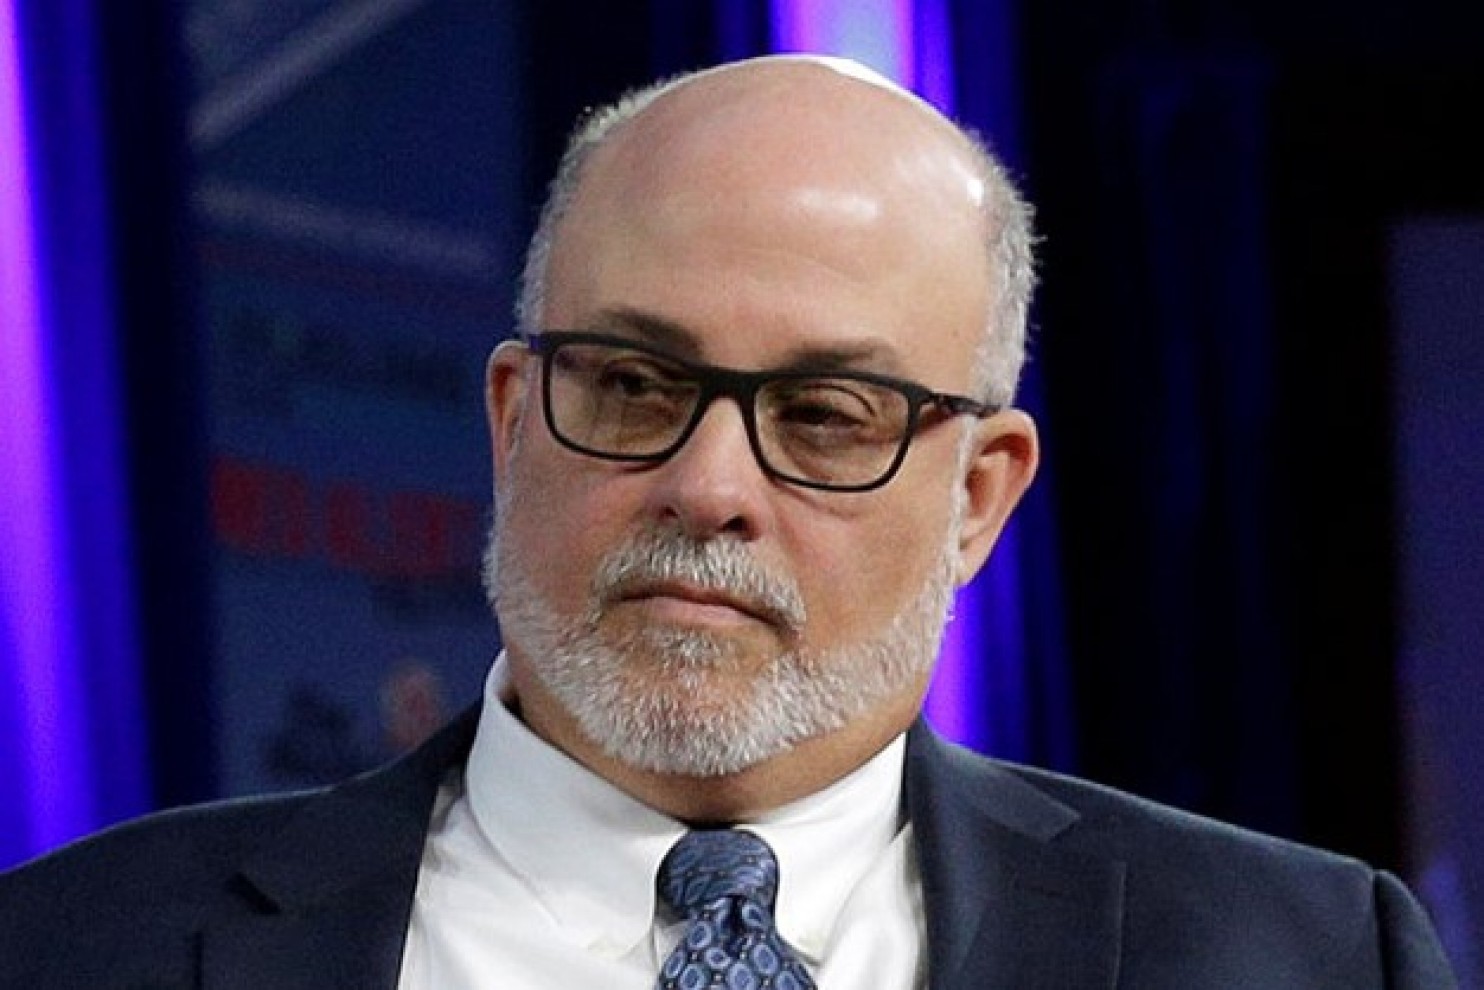 Mark Levin: Open Letter to CNN'S Brian Stelter: 'You are thoroughly dishonest' - Artvoice1484 x 990